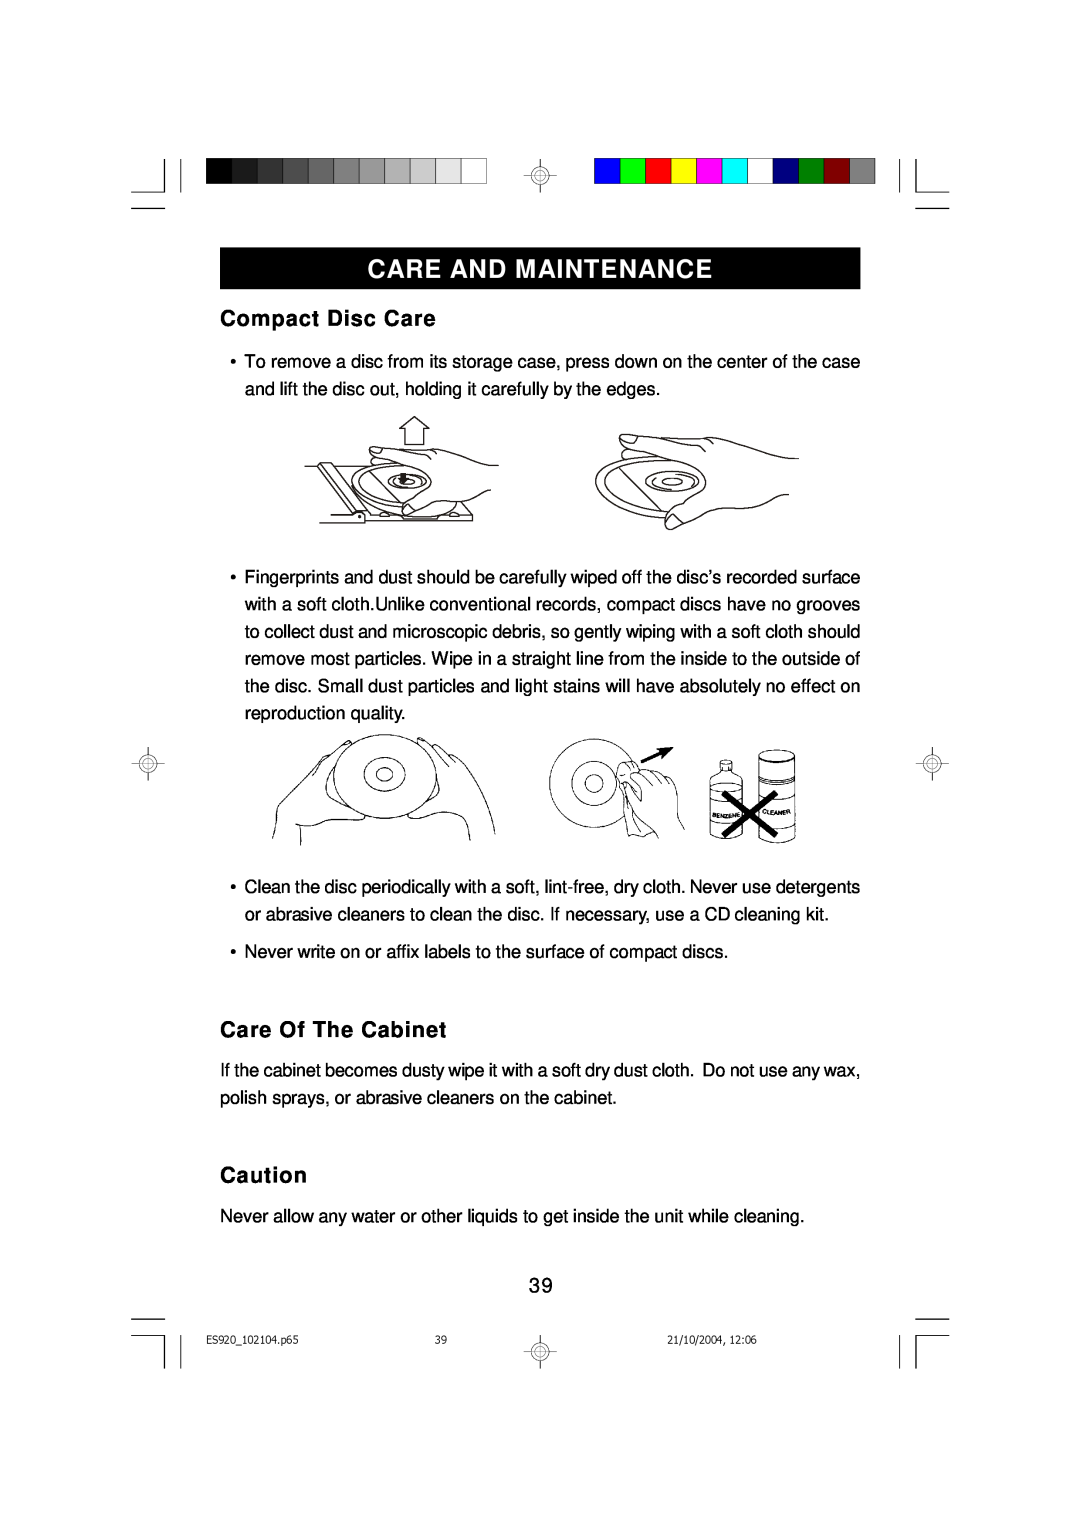 Emerson ES920 owner manual Care And Maintenance, Compact Disc Care, Care Of The Cabinet 